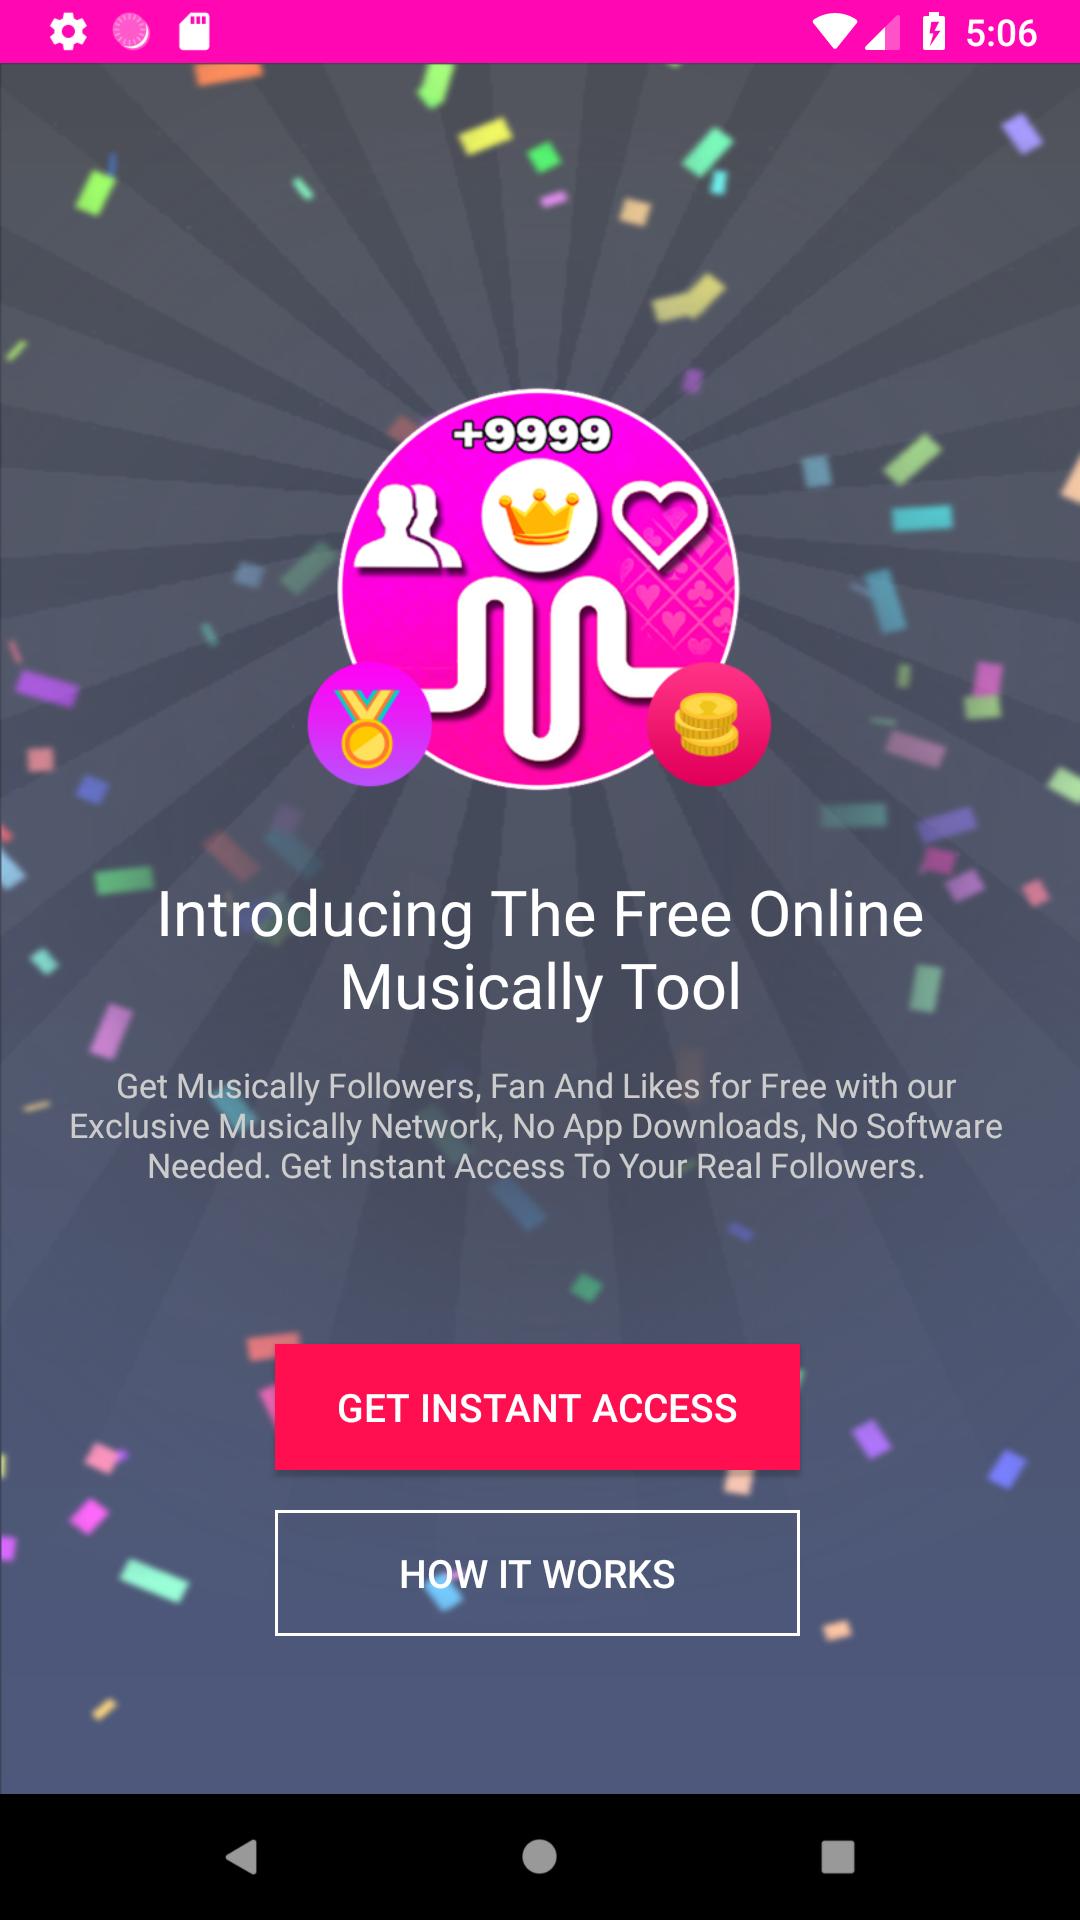 Musically fans free